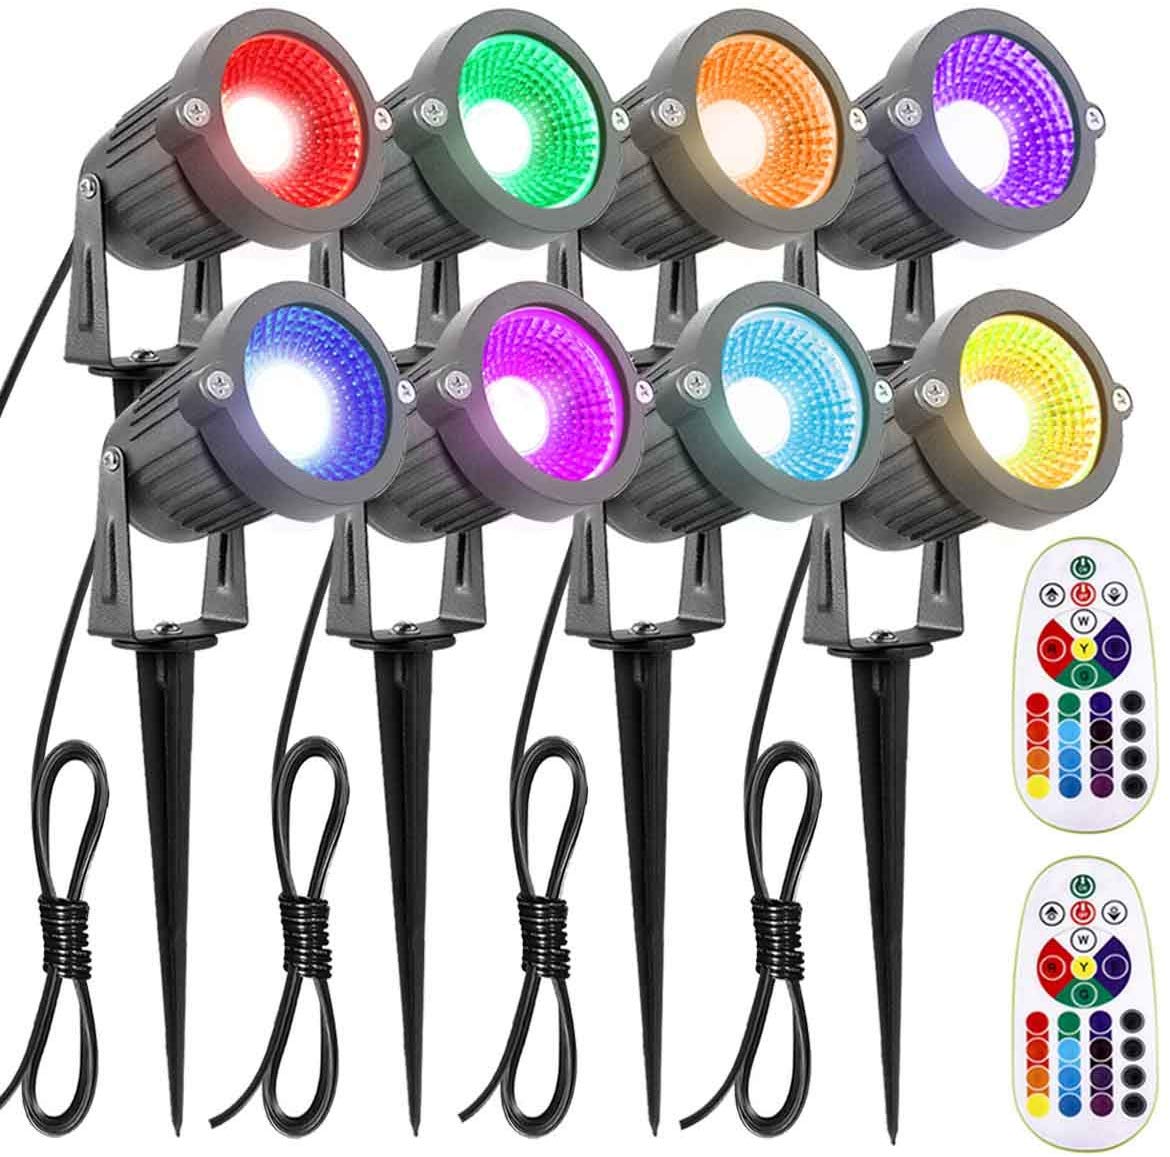 ZUCKEO Multi-Colored Outdoor Landscape Lighting, 8-Pack